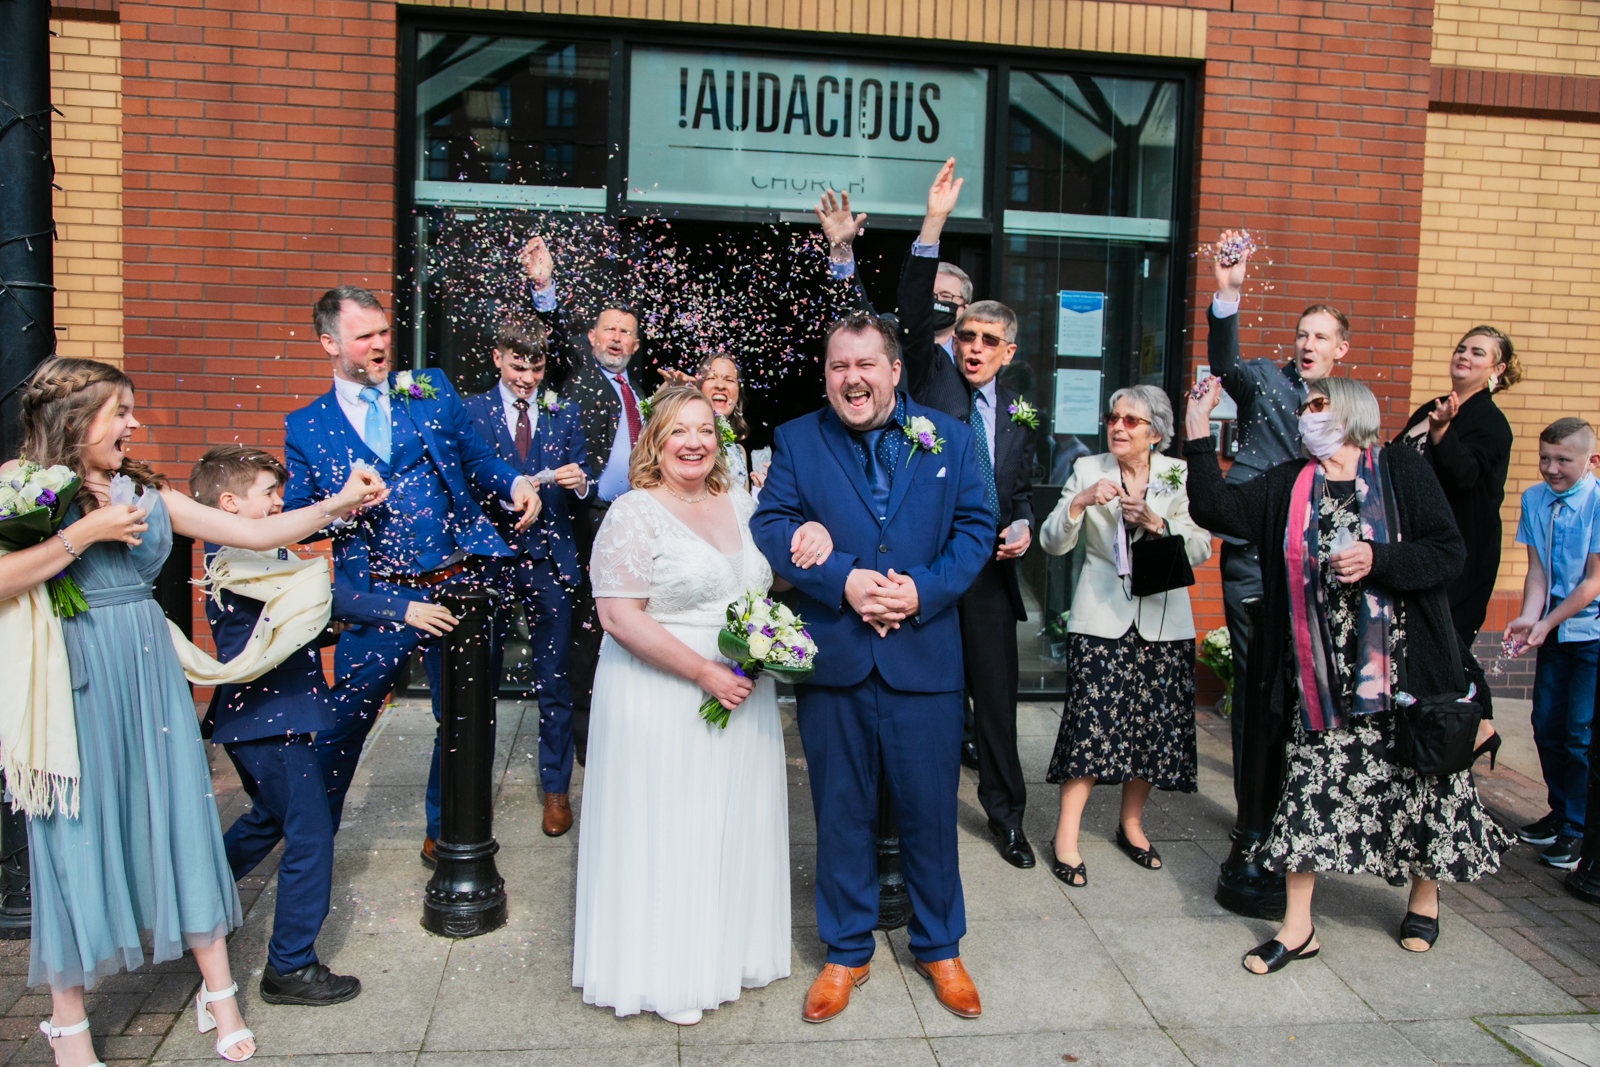 Jo and Pete’s Audacious wedding, Manchester